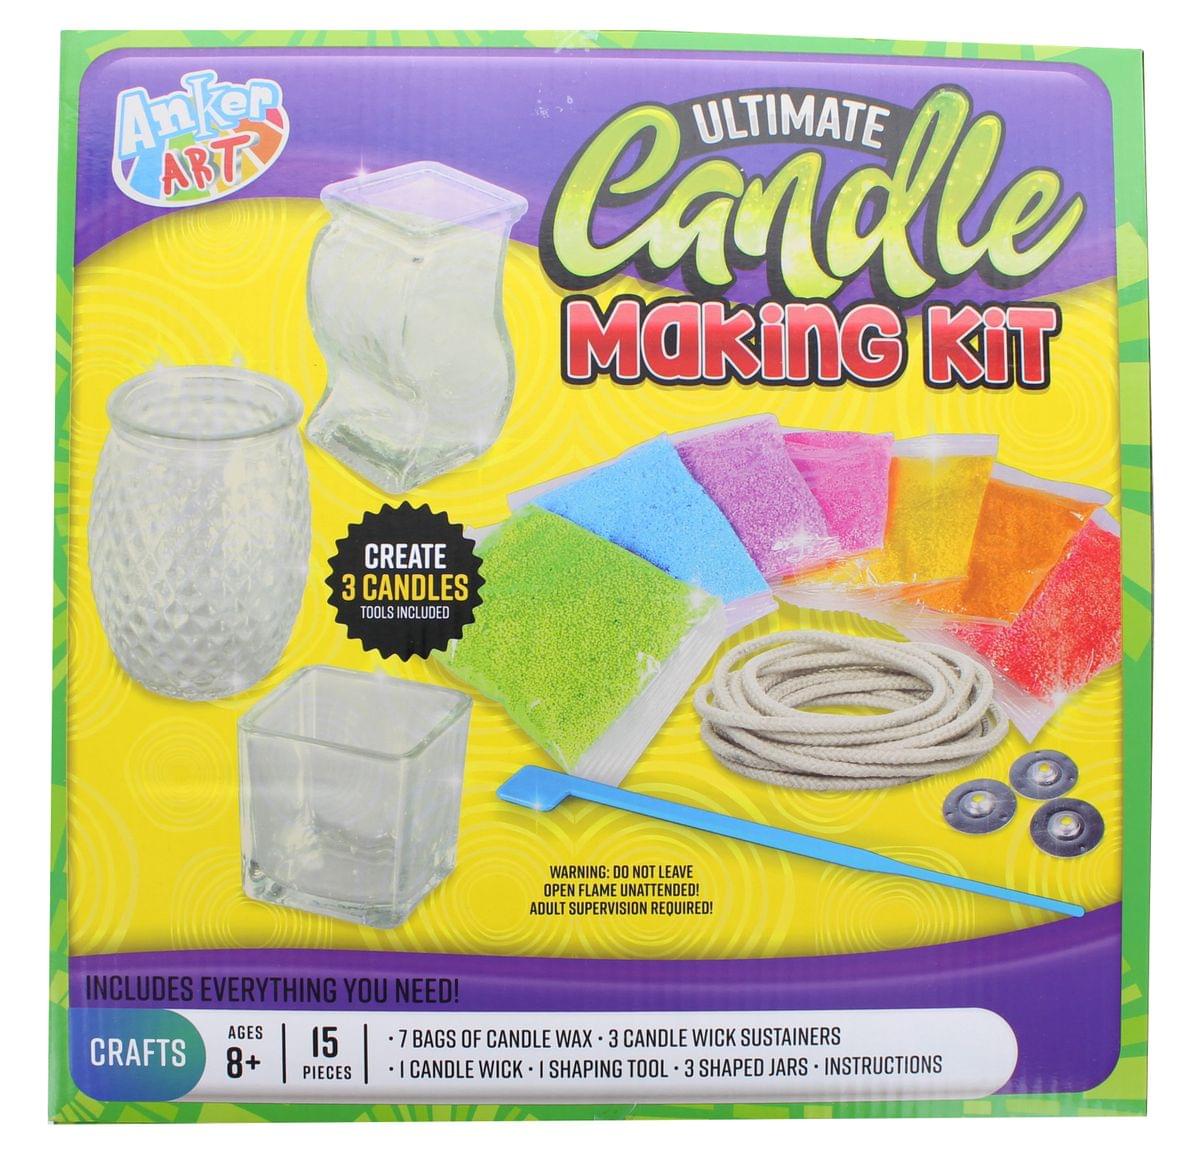 Anker Art Ultimate Candle Making Kit